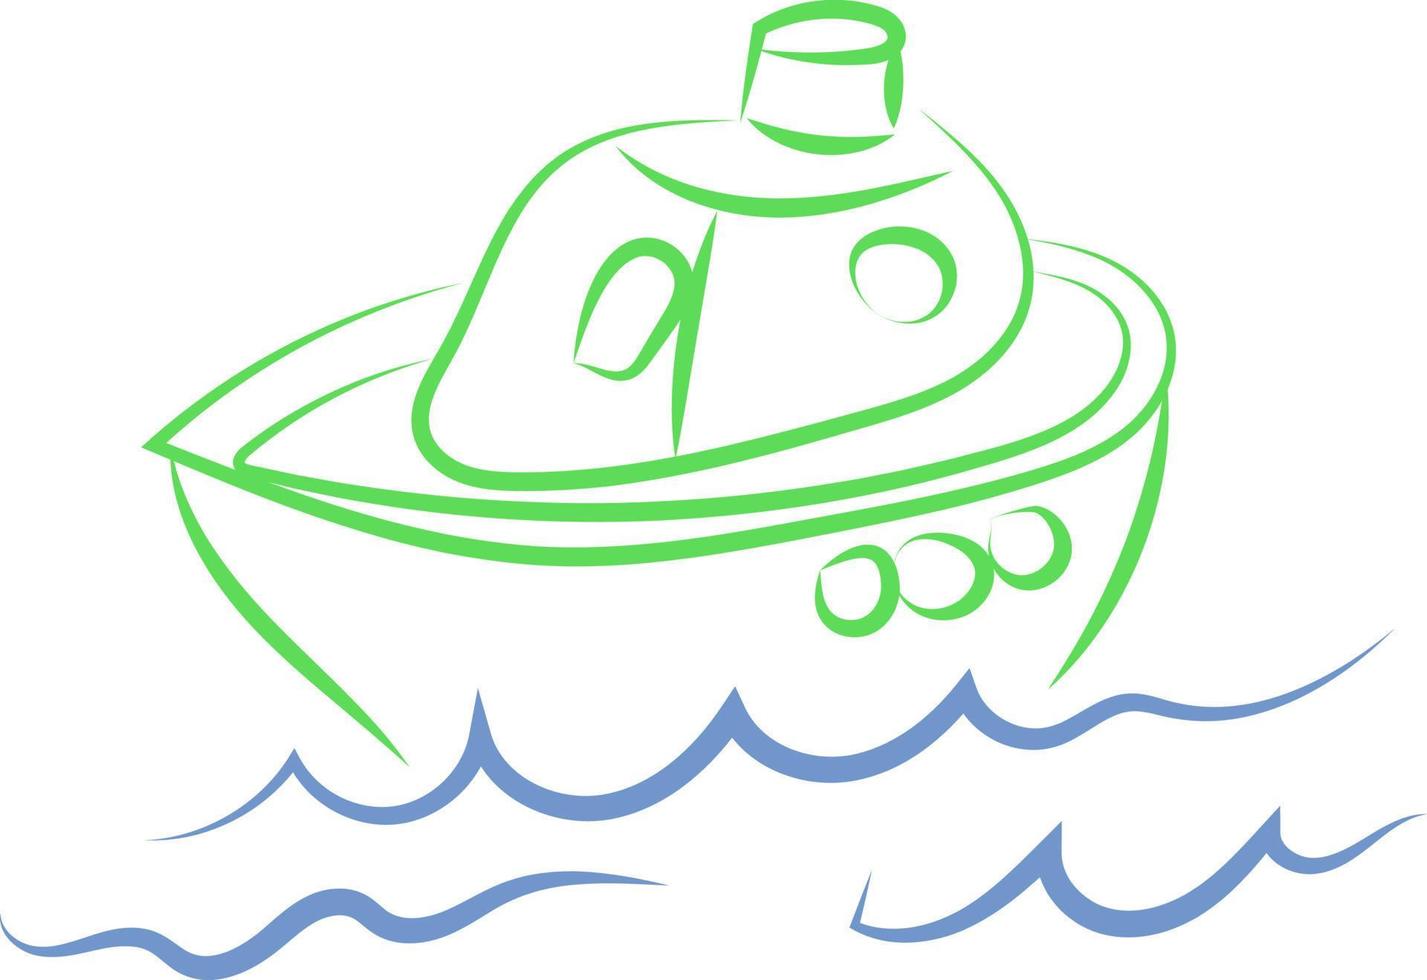 Small boat drawing, illustration, vector on white background.